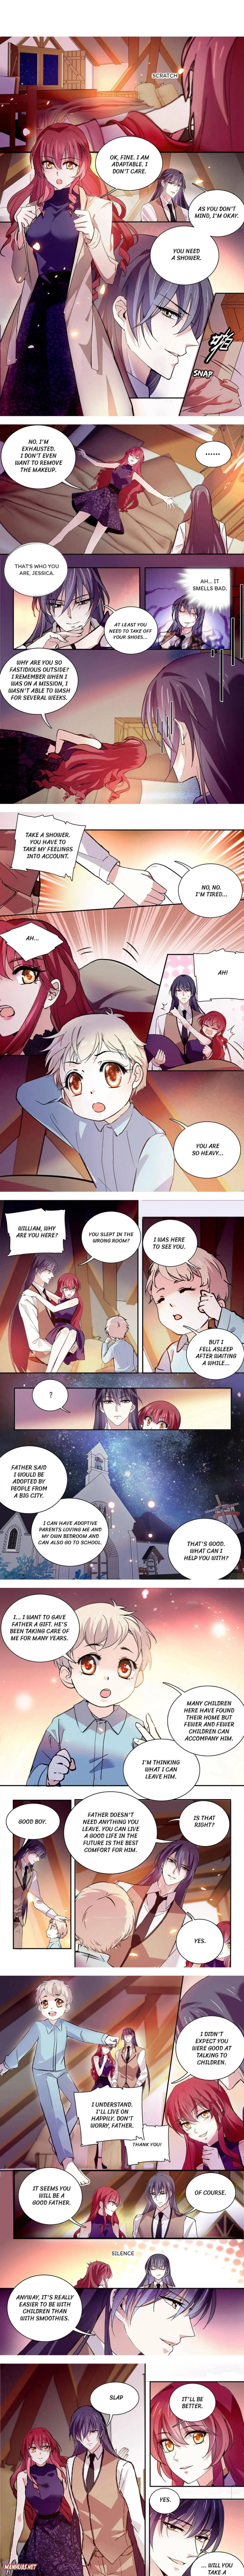 My Love Story - Page 1